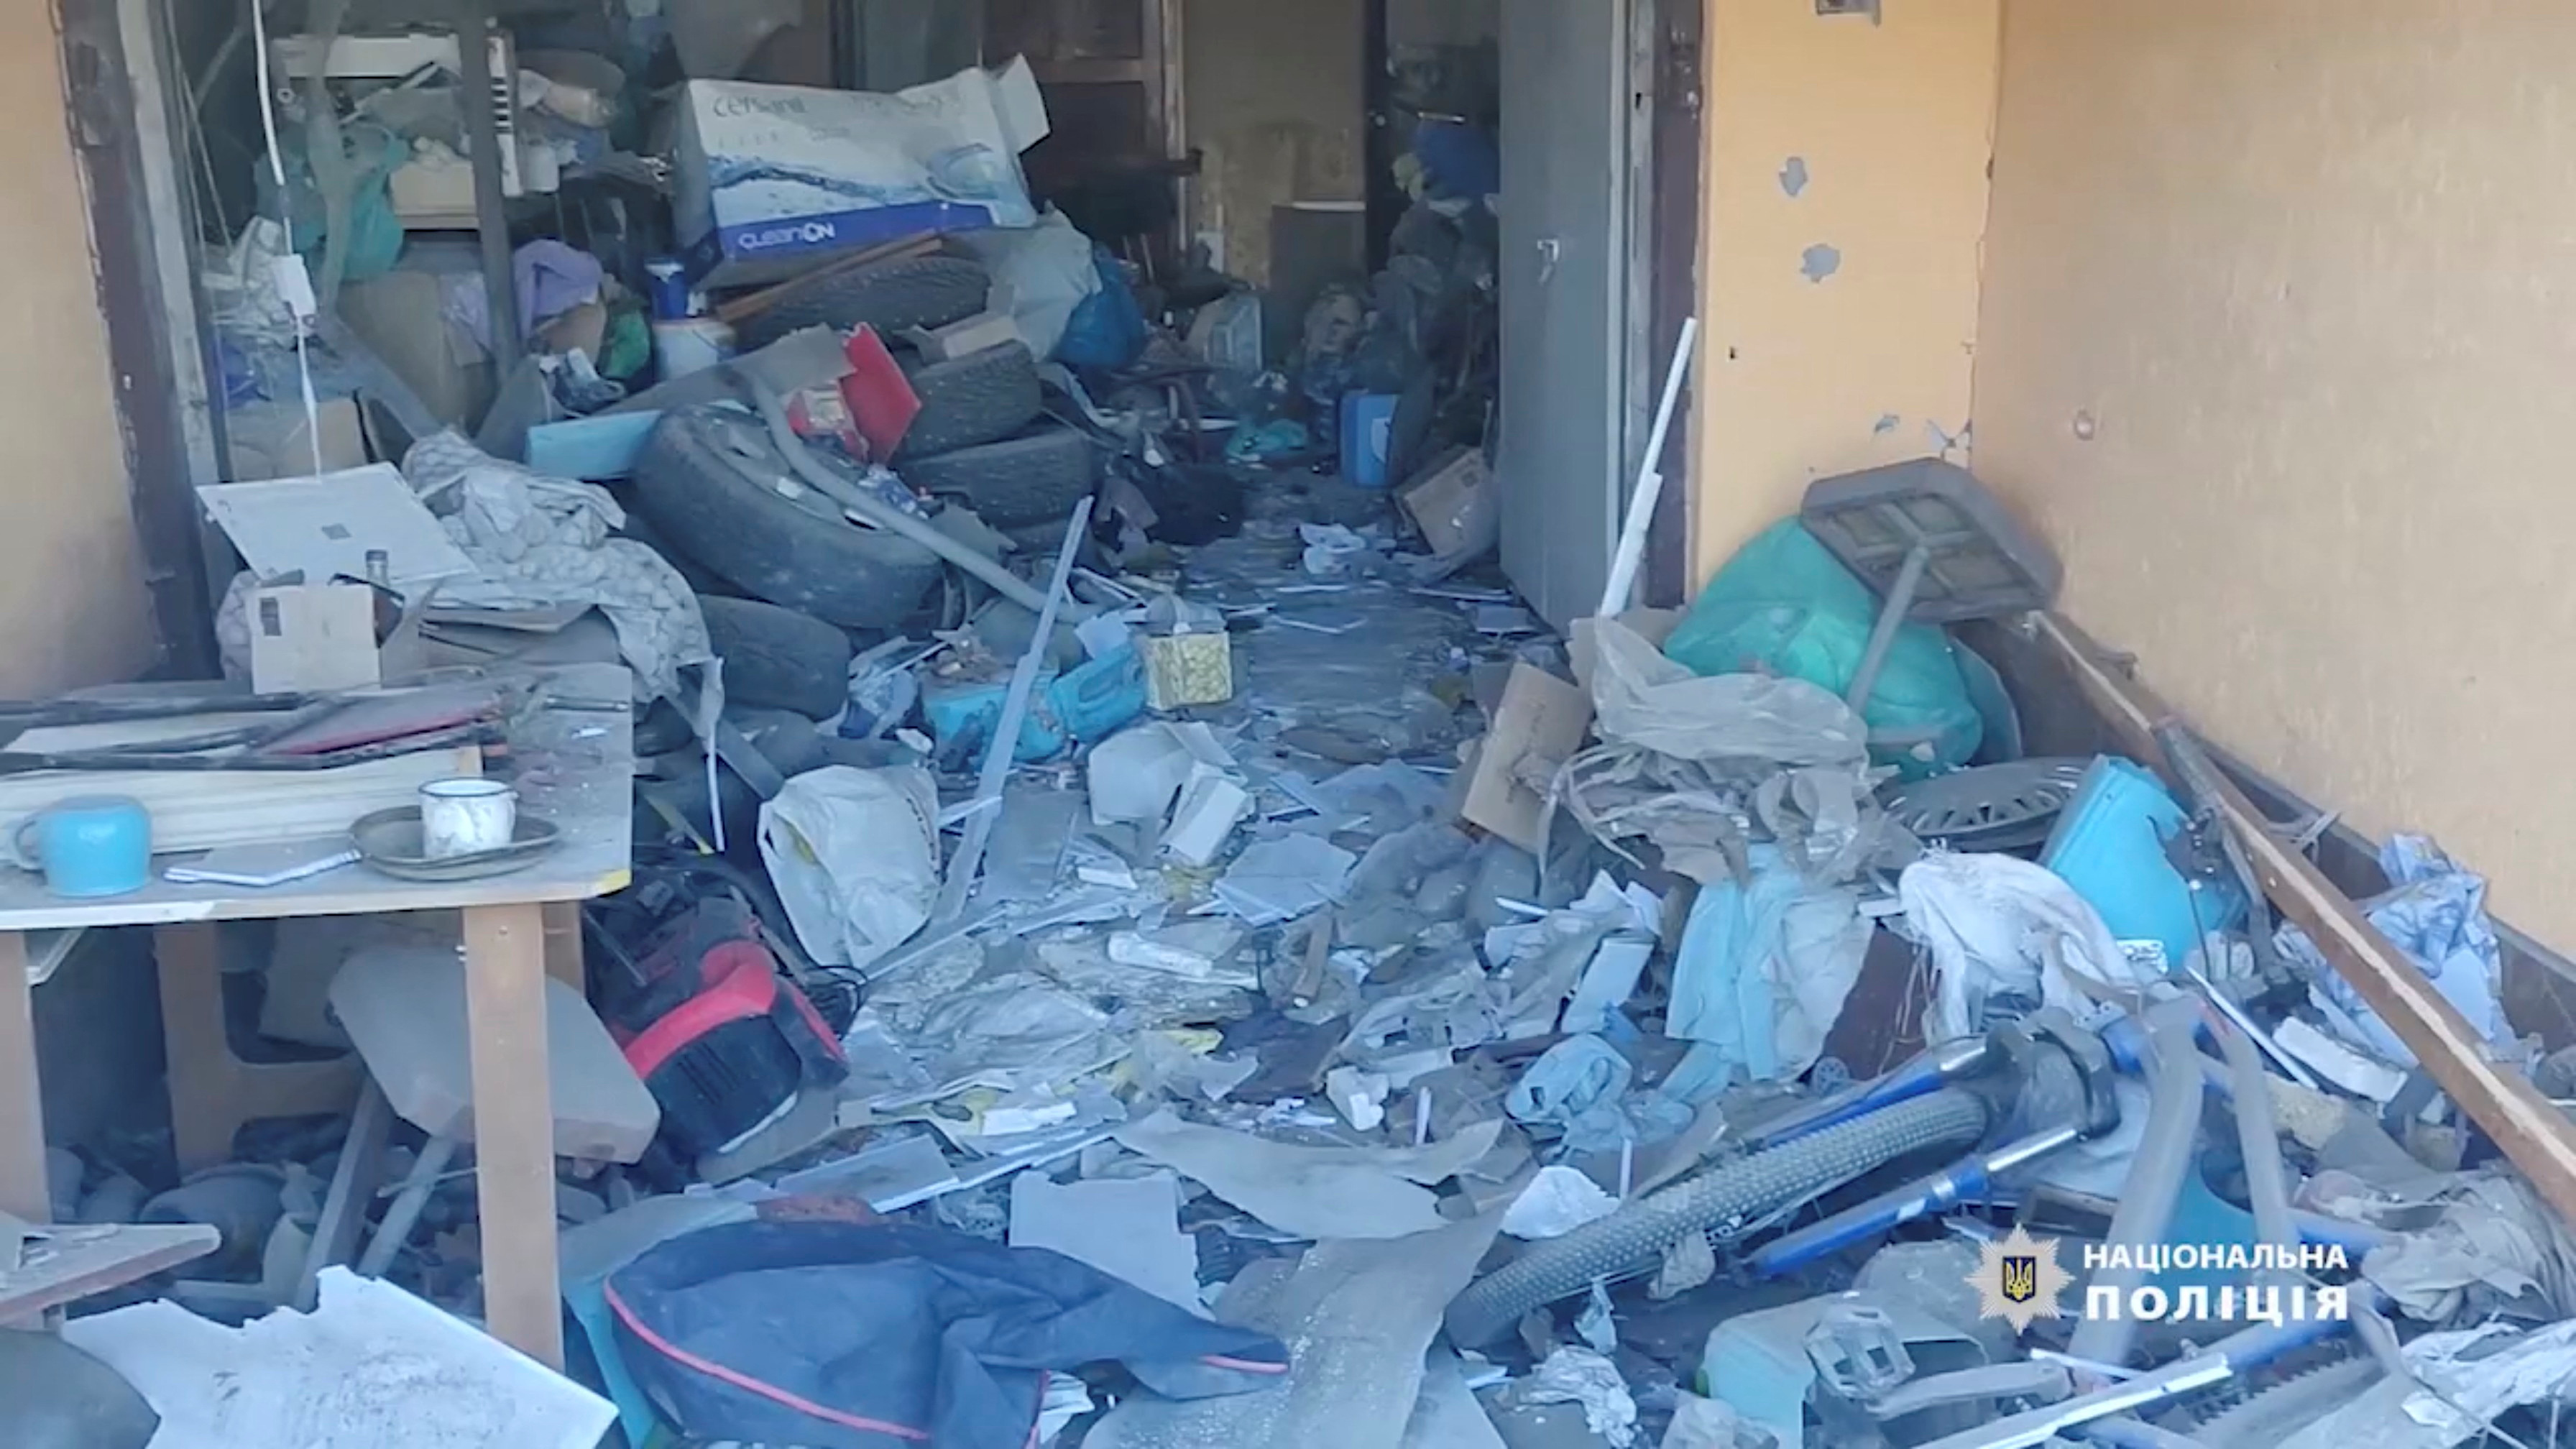 A view shows damage inside a building, as Russia's invasion of Ukraine continues, in Bakhmut